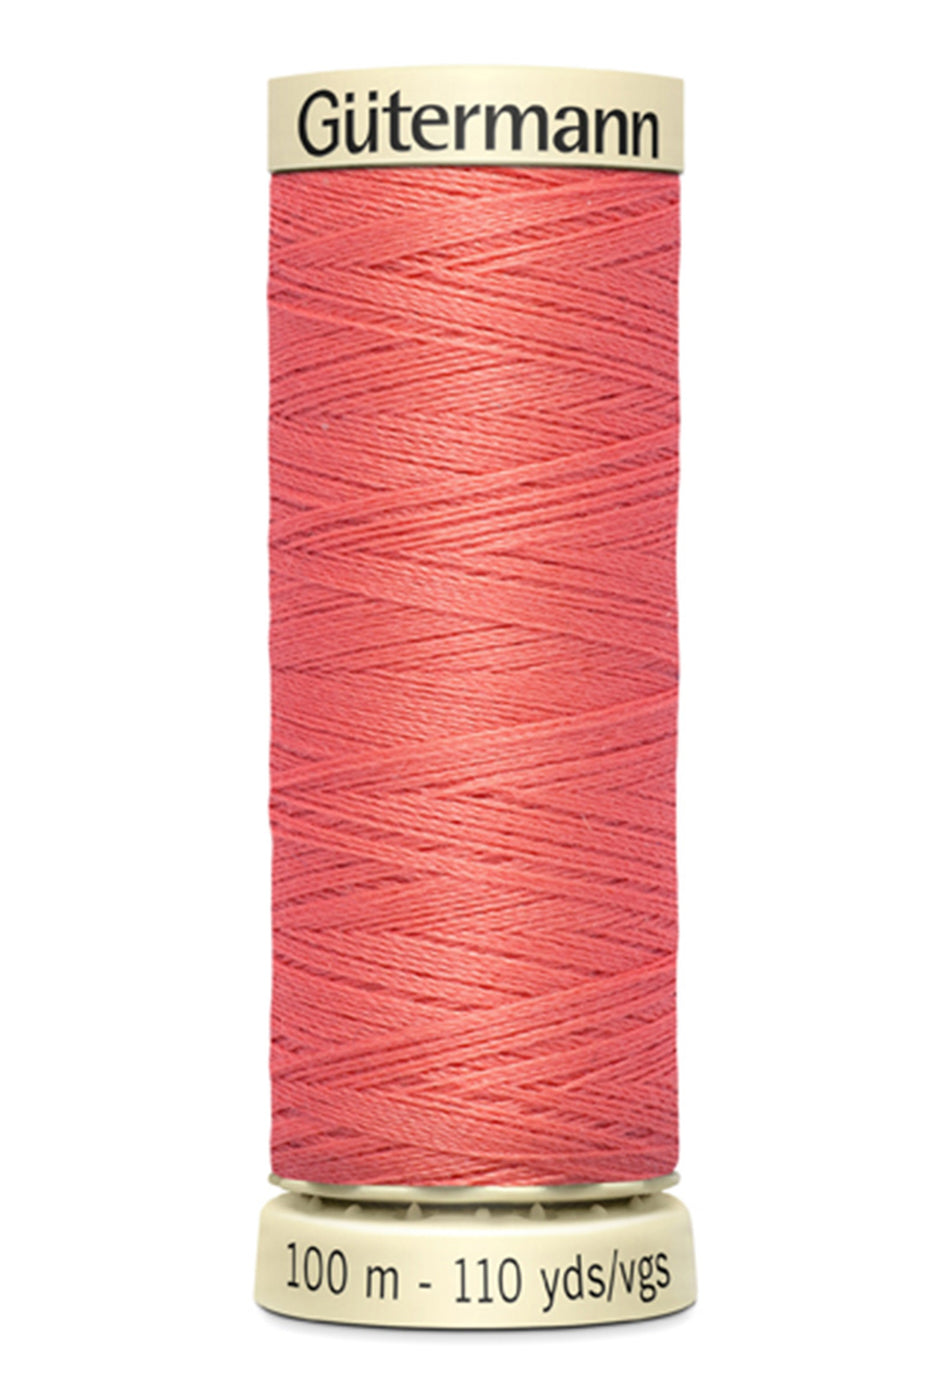 Gutermann Sew-All Polyester 375 Light Coral 100m/110yd